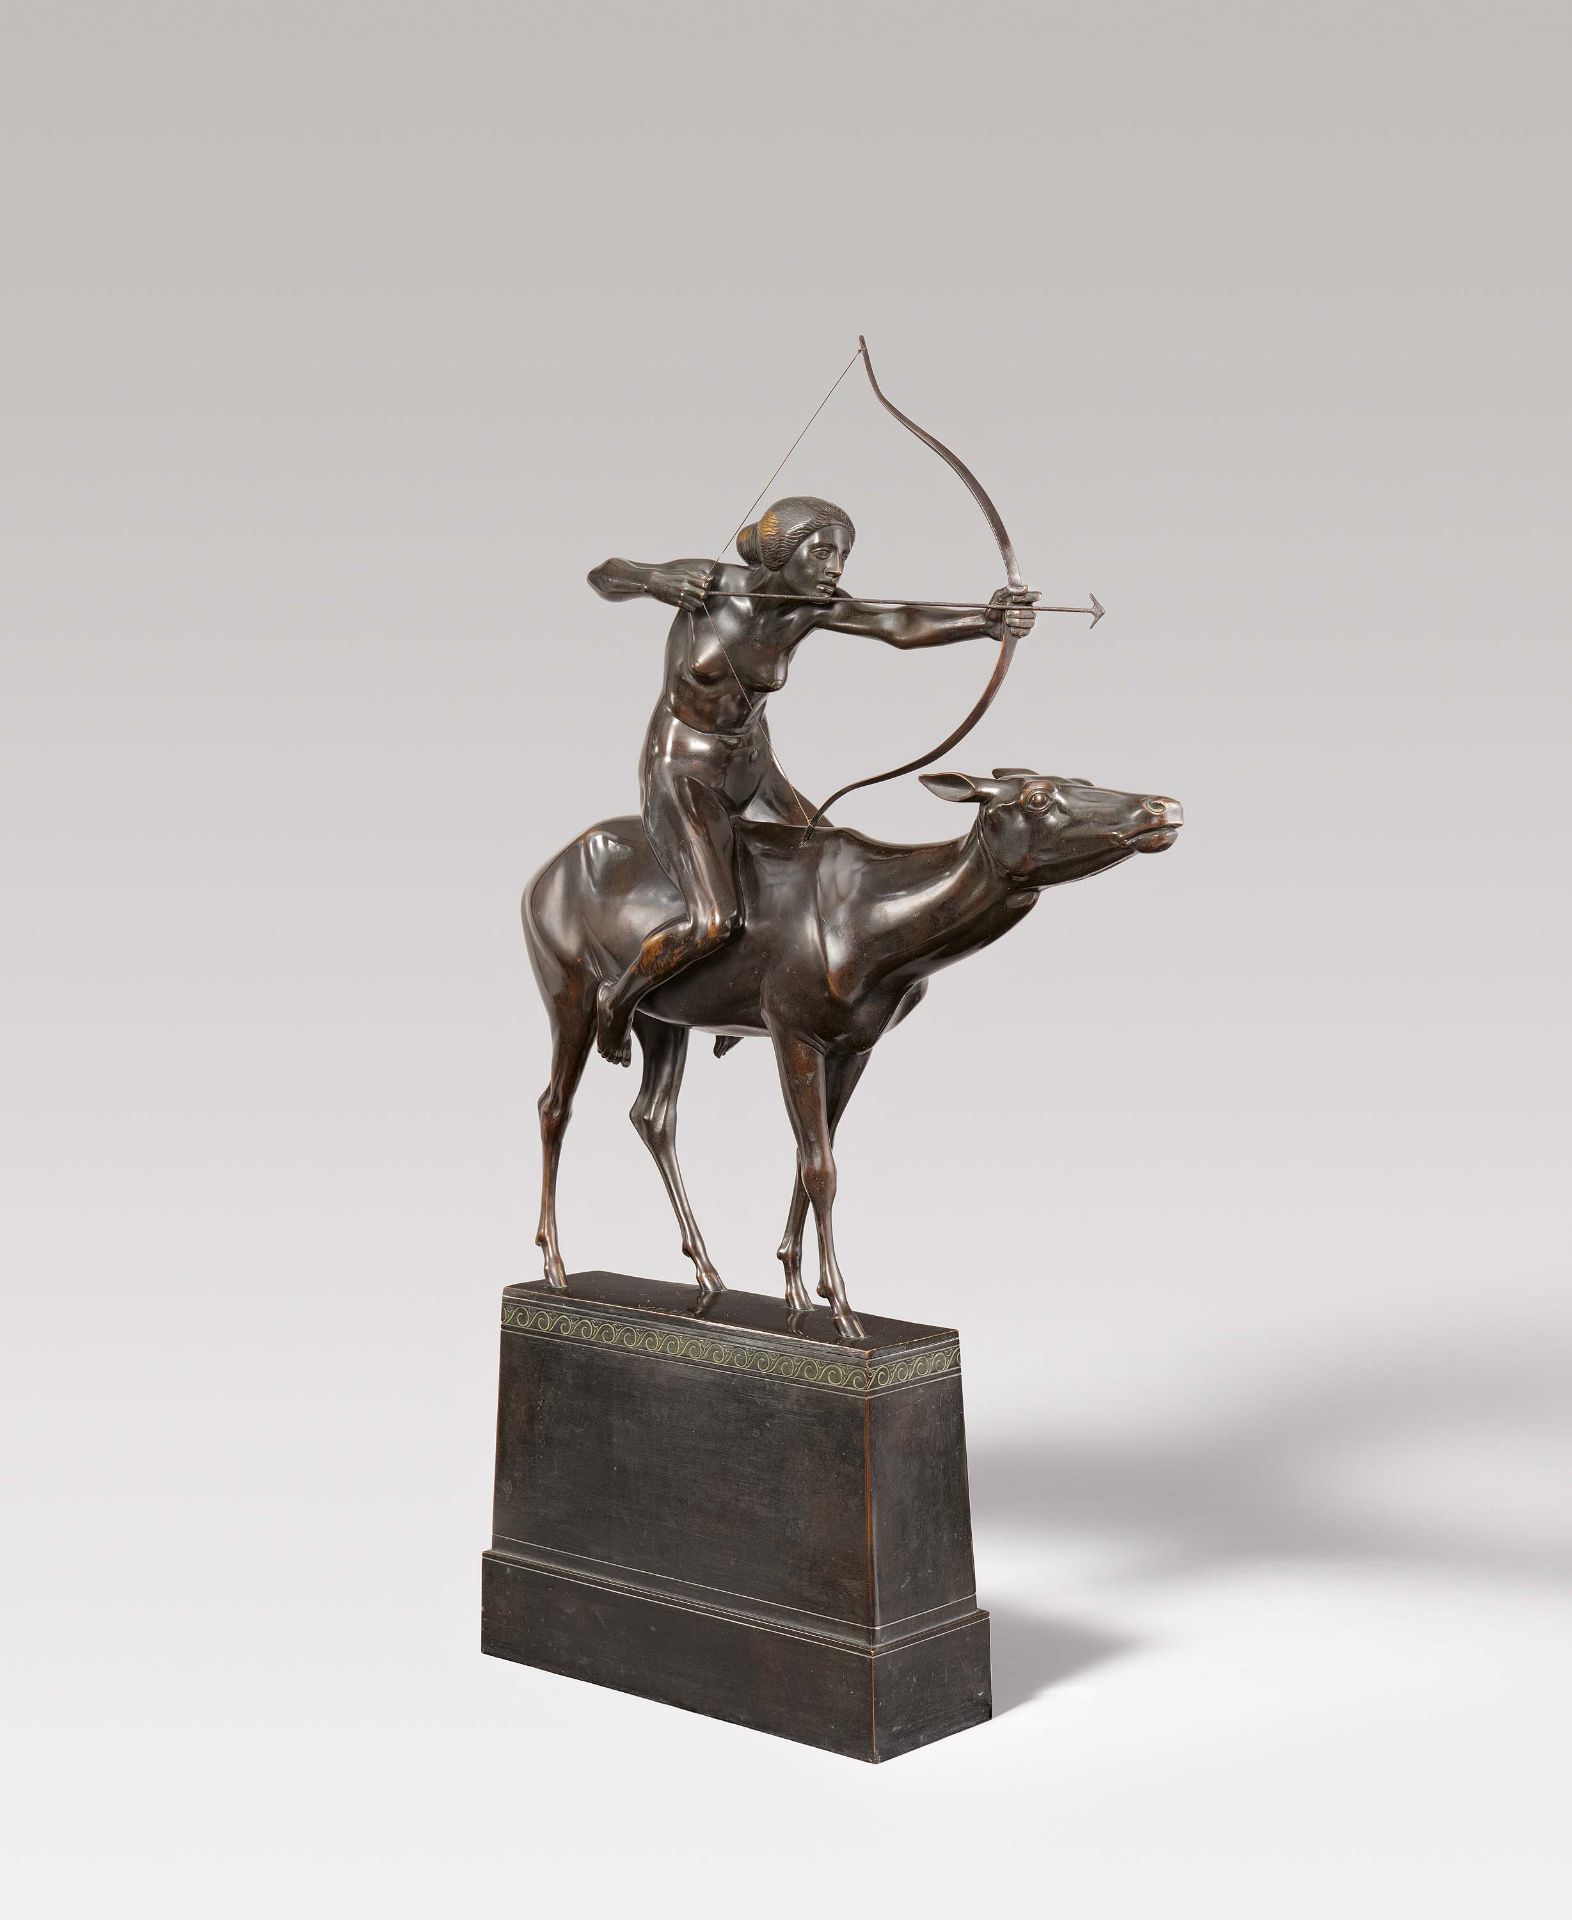 Georg Wrba: Diana on the Stag Cow